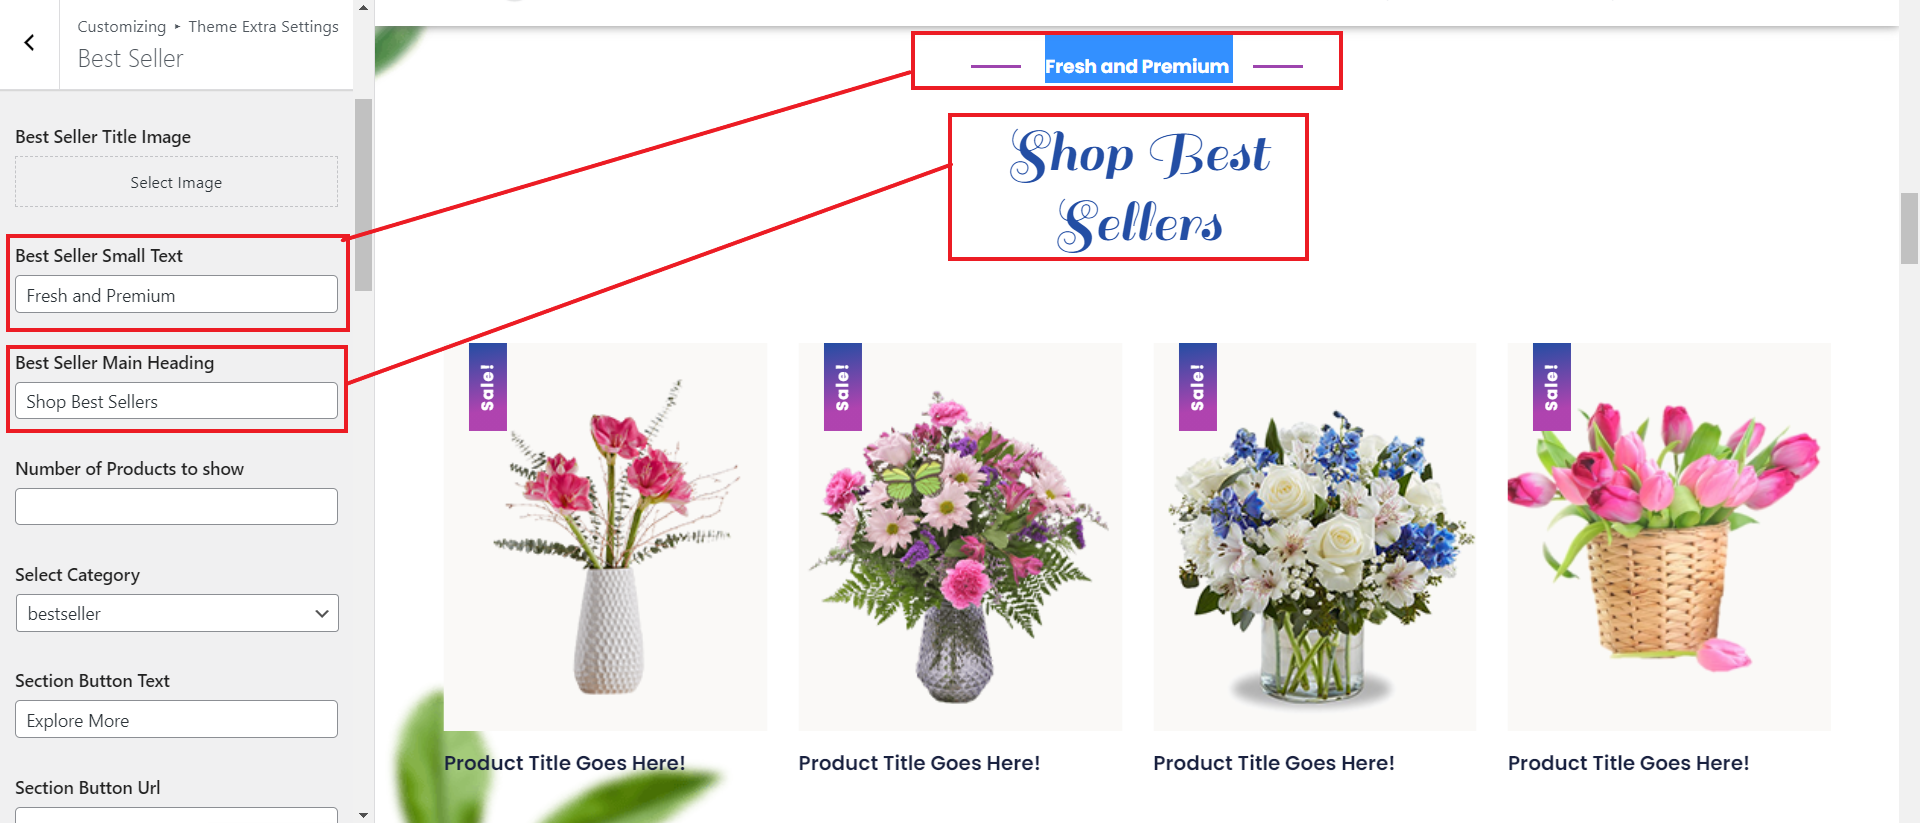 Image showing customizer setting for pricing plans